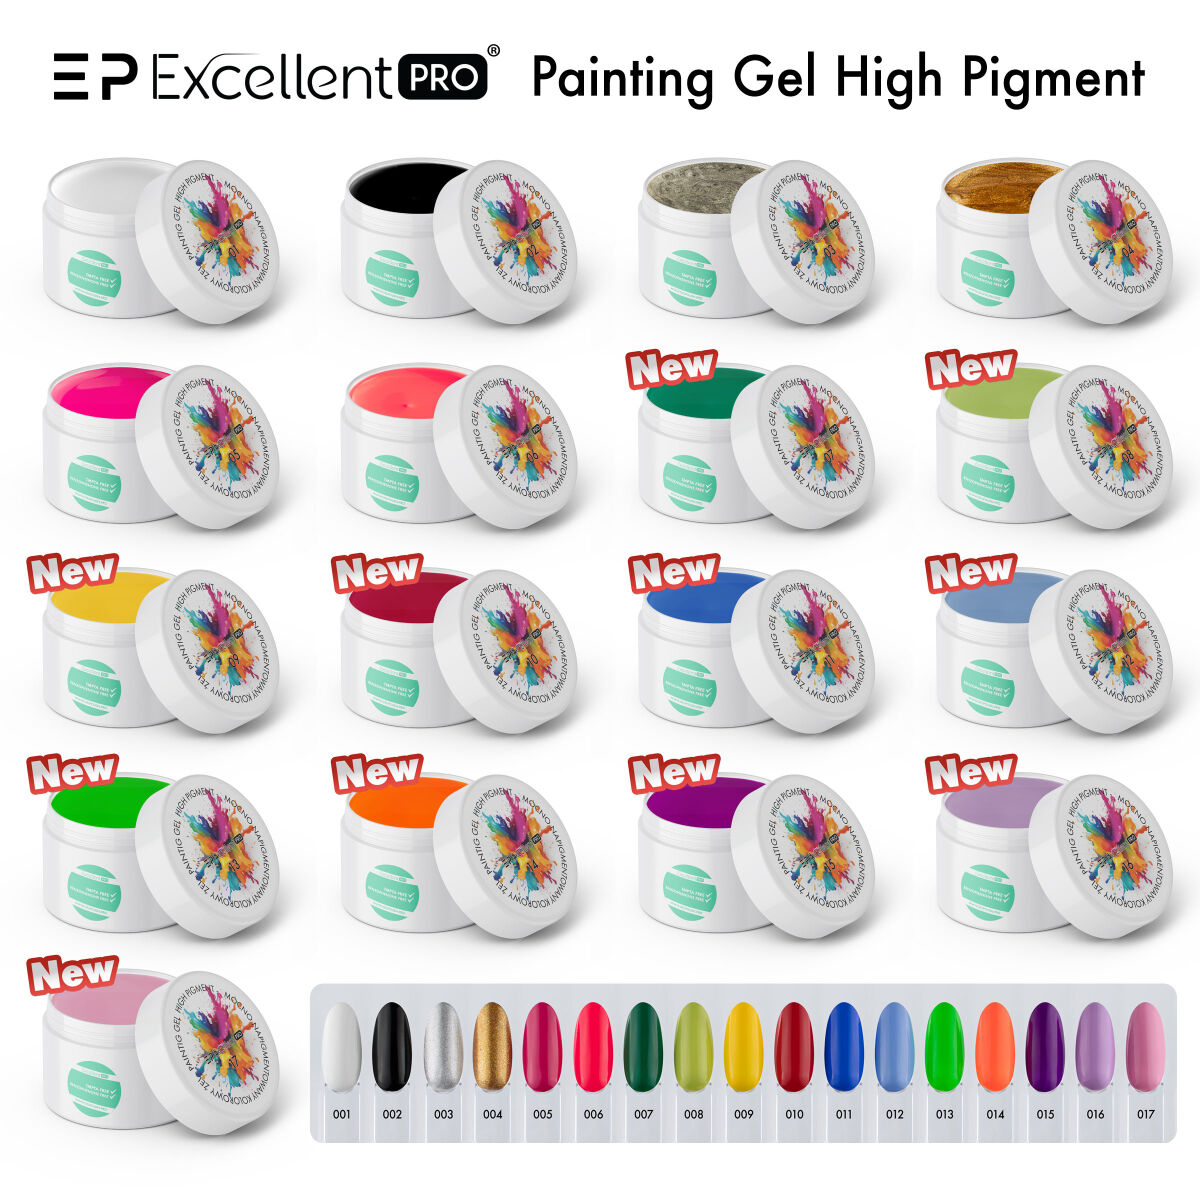 Excellent PRO Painting Gel High Pigment - New Colors